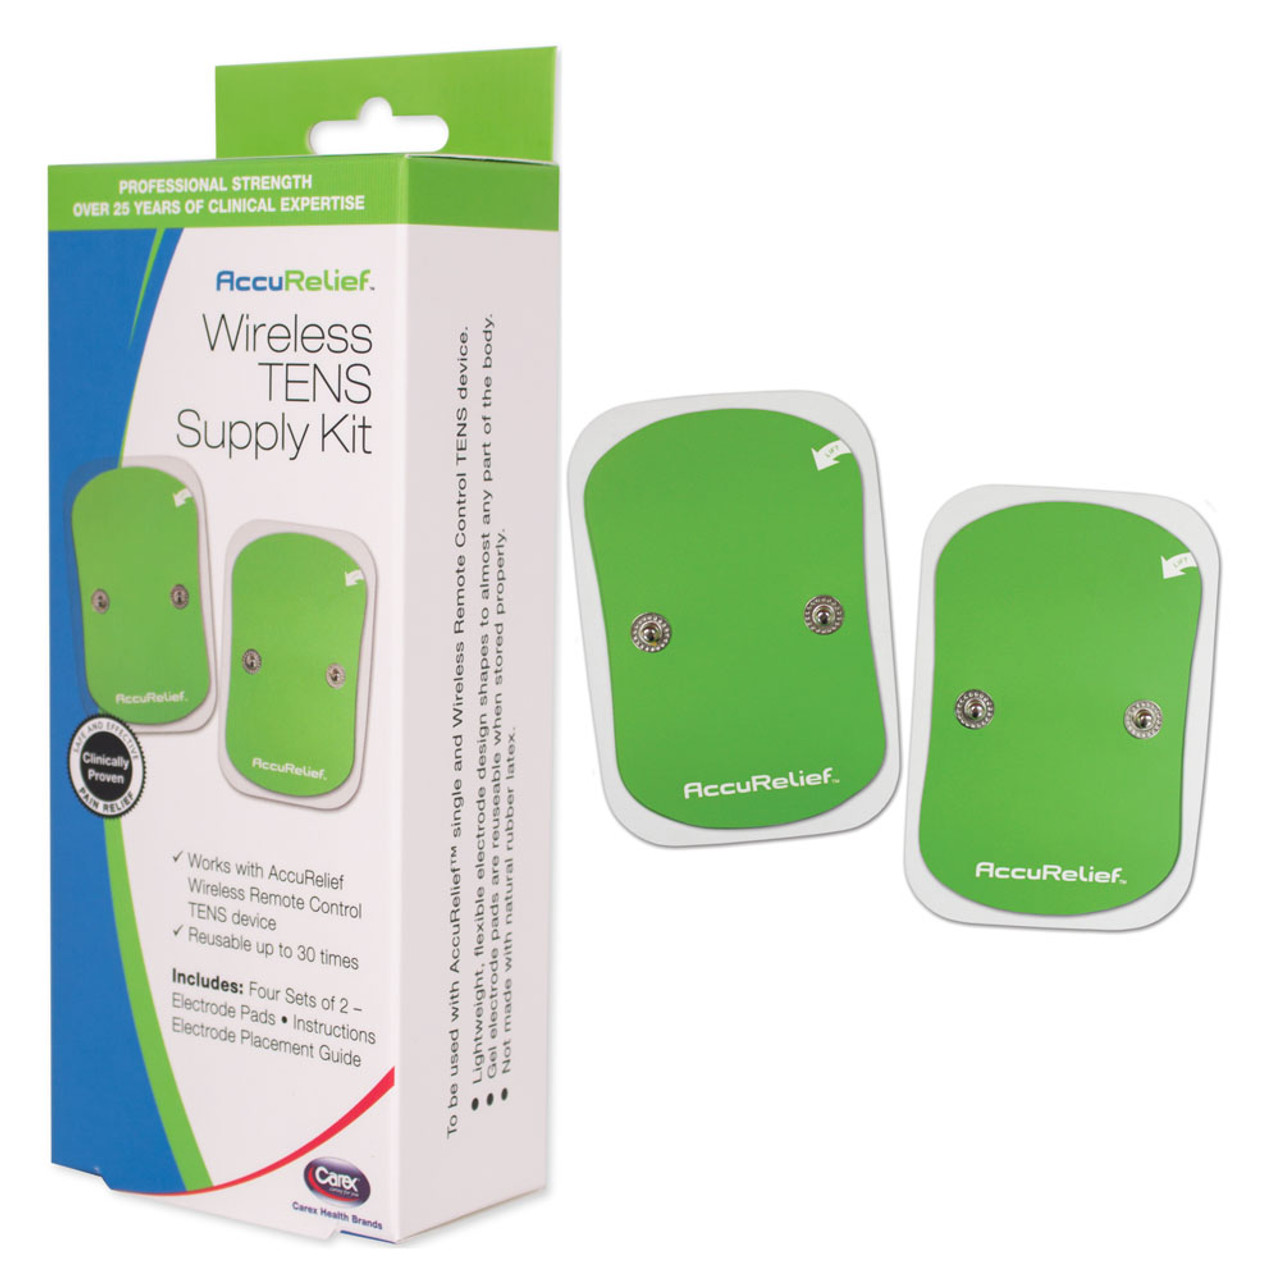 AccuRelief TENs Supply Kit